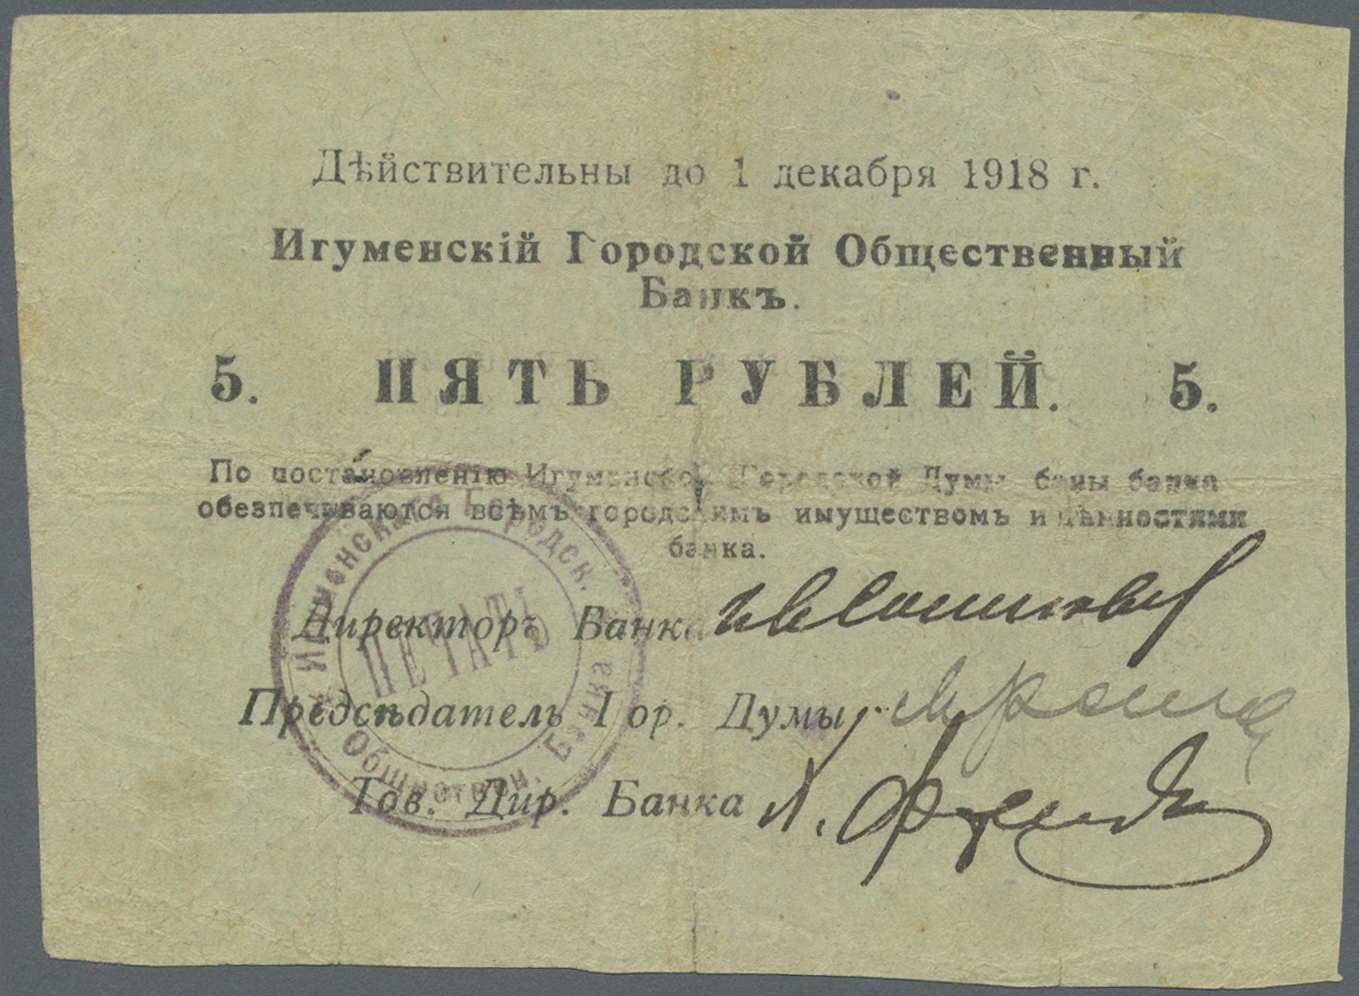 00259 Belarus: Igumen City Public Bank 5 Rubles 1918, P.NL (Istomin 302), Used Condition With  Folds And Stains, Tiny Ho - Belarus